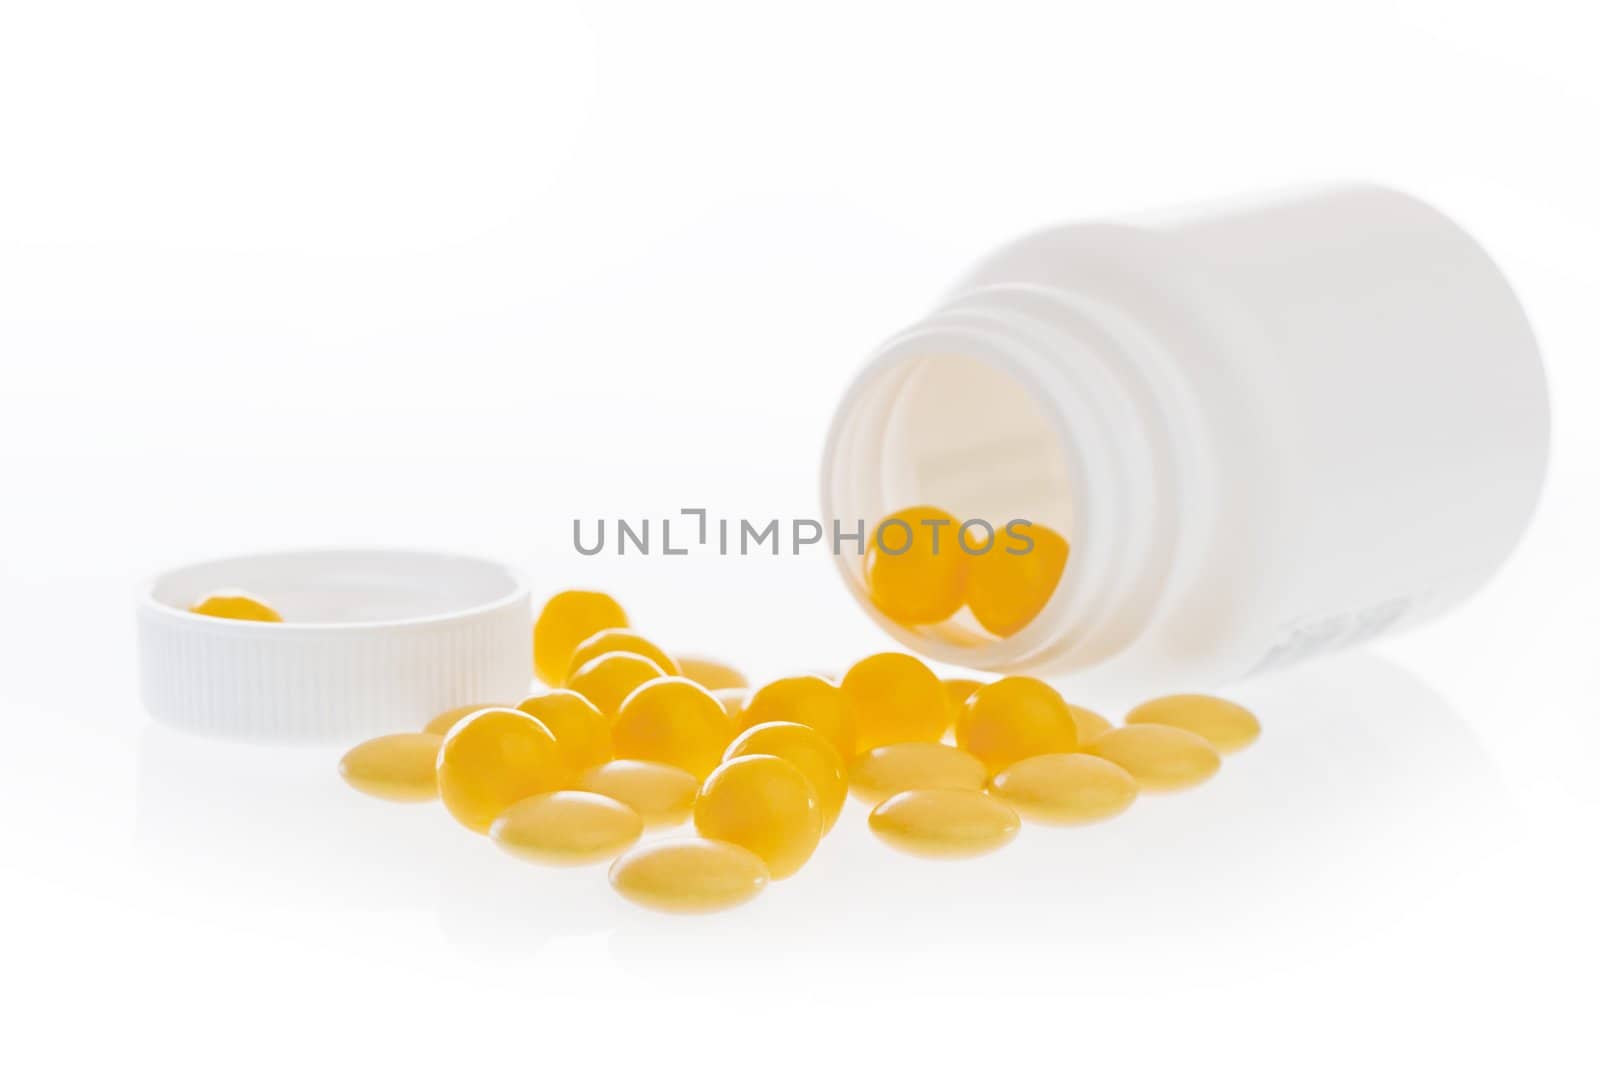 Yellow pills scattered in front of the white plastic jar.